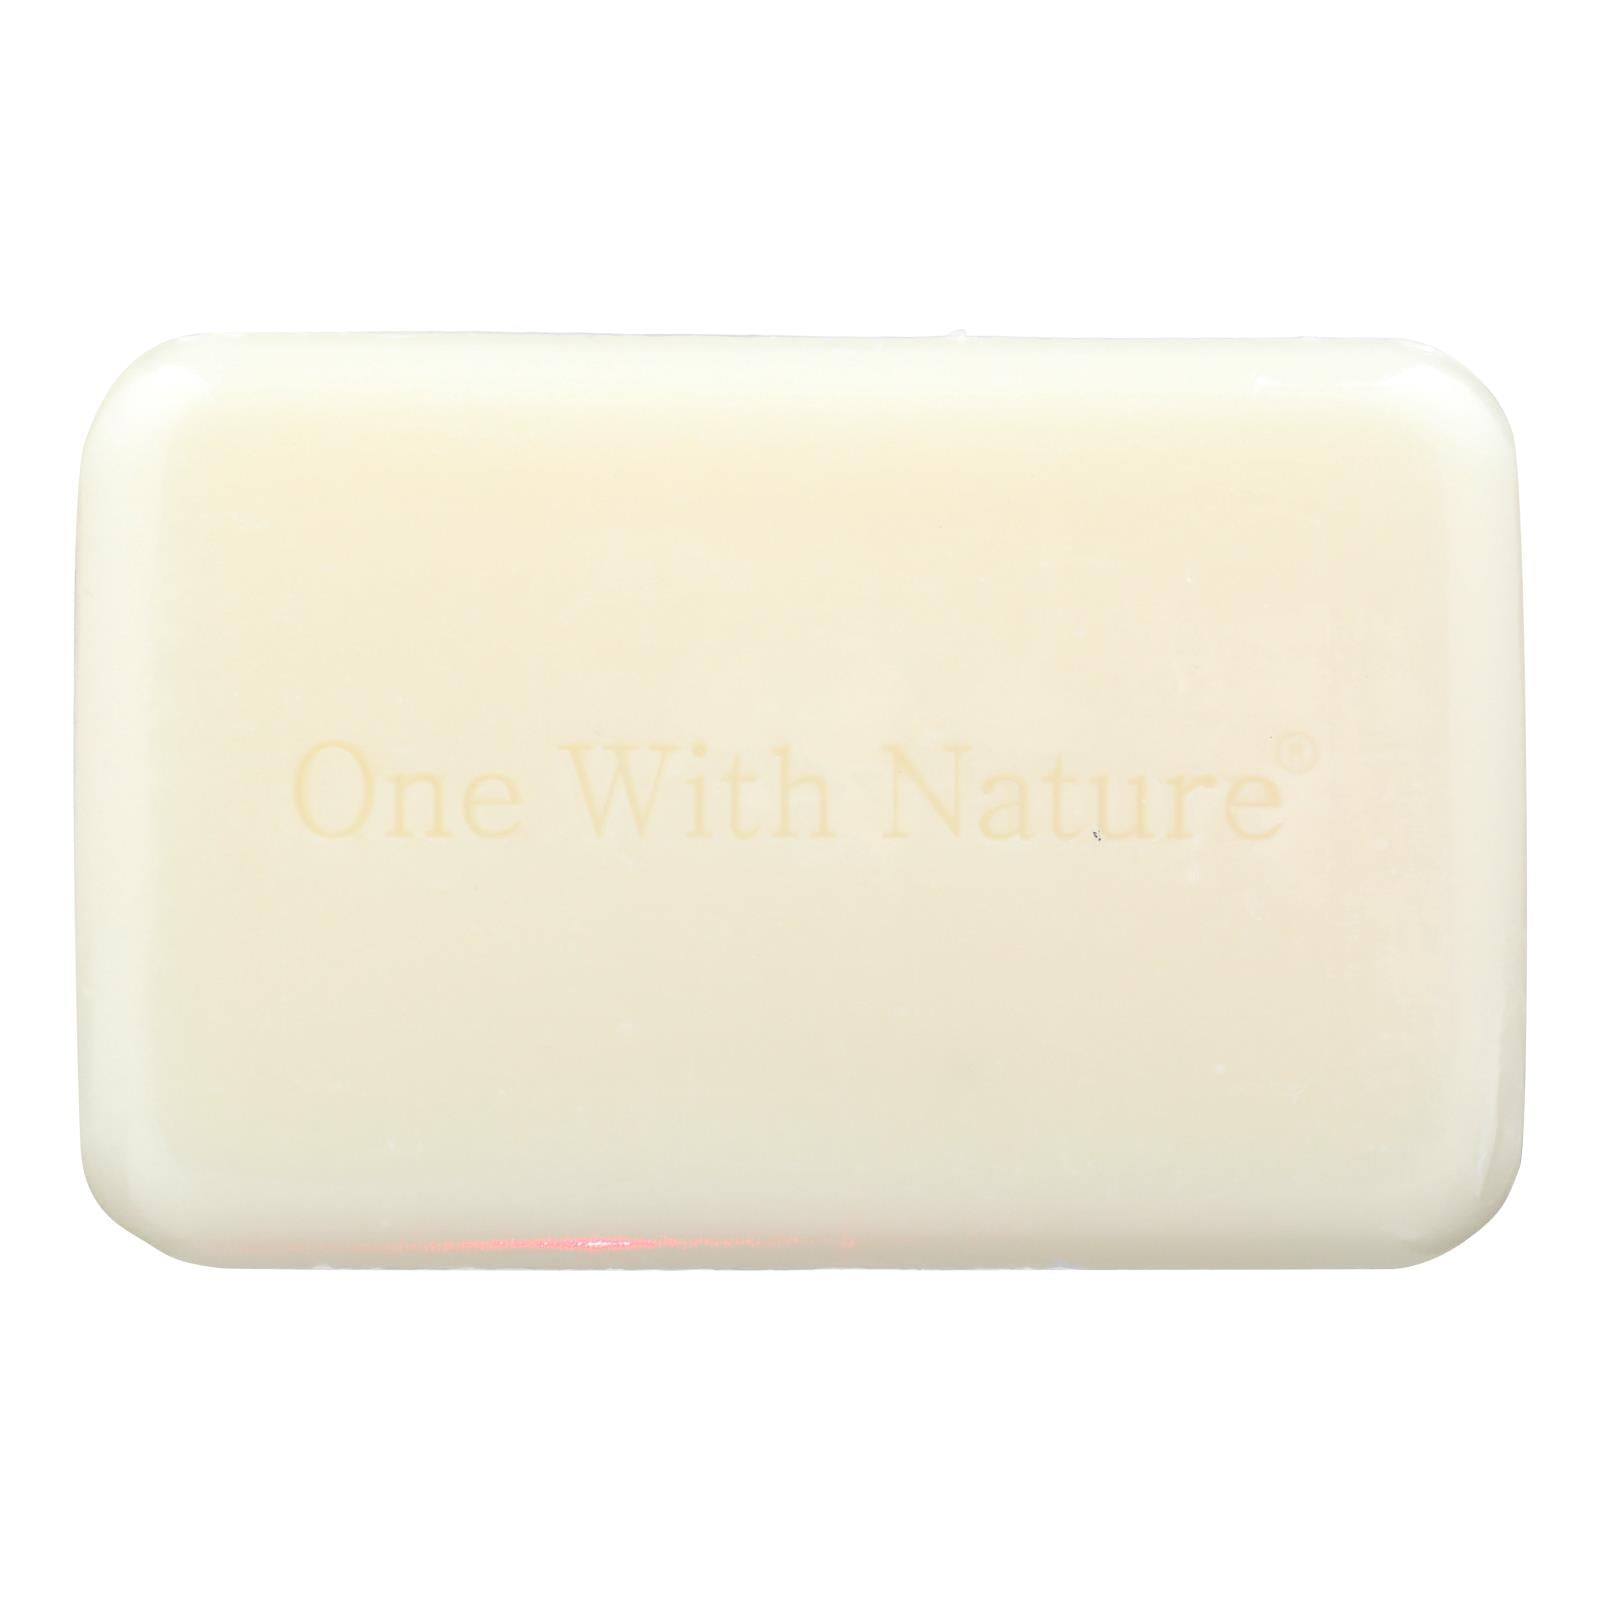 One With Nature Naked Soap - Goat's Milk And Lavender - Case Of 6 - 4 Oz.